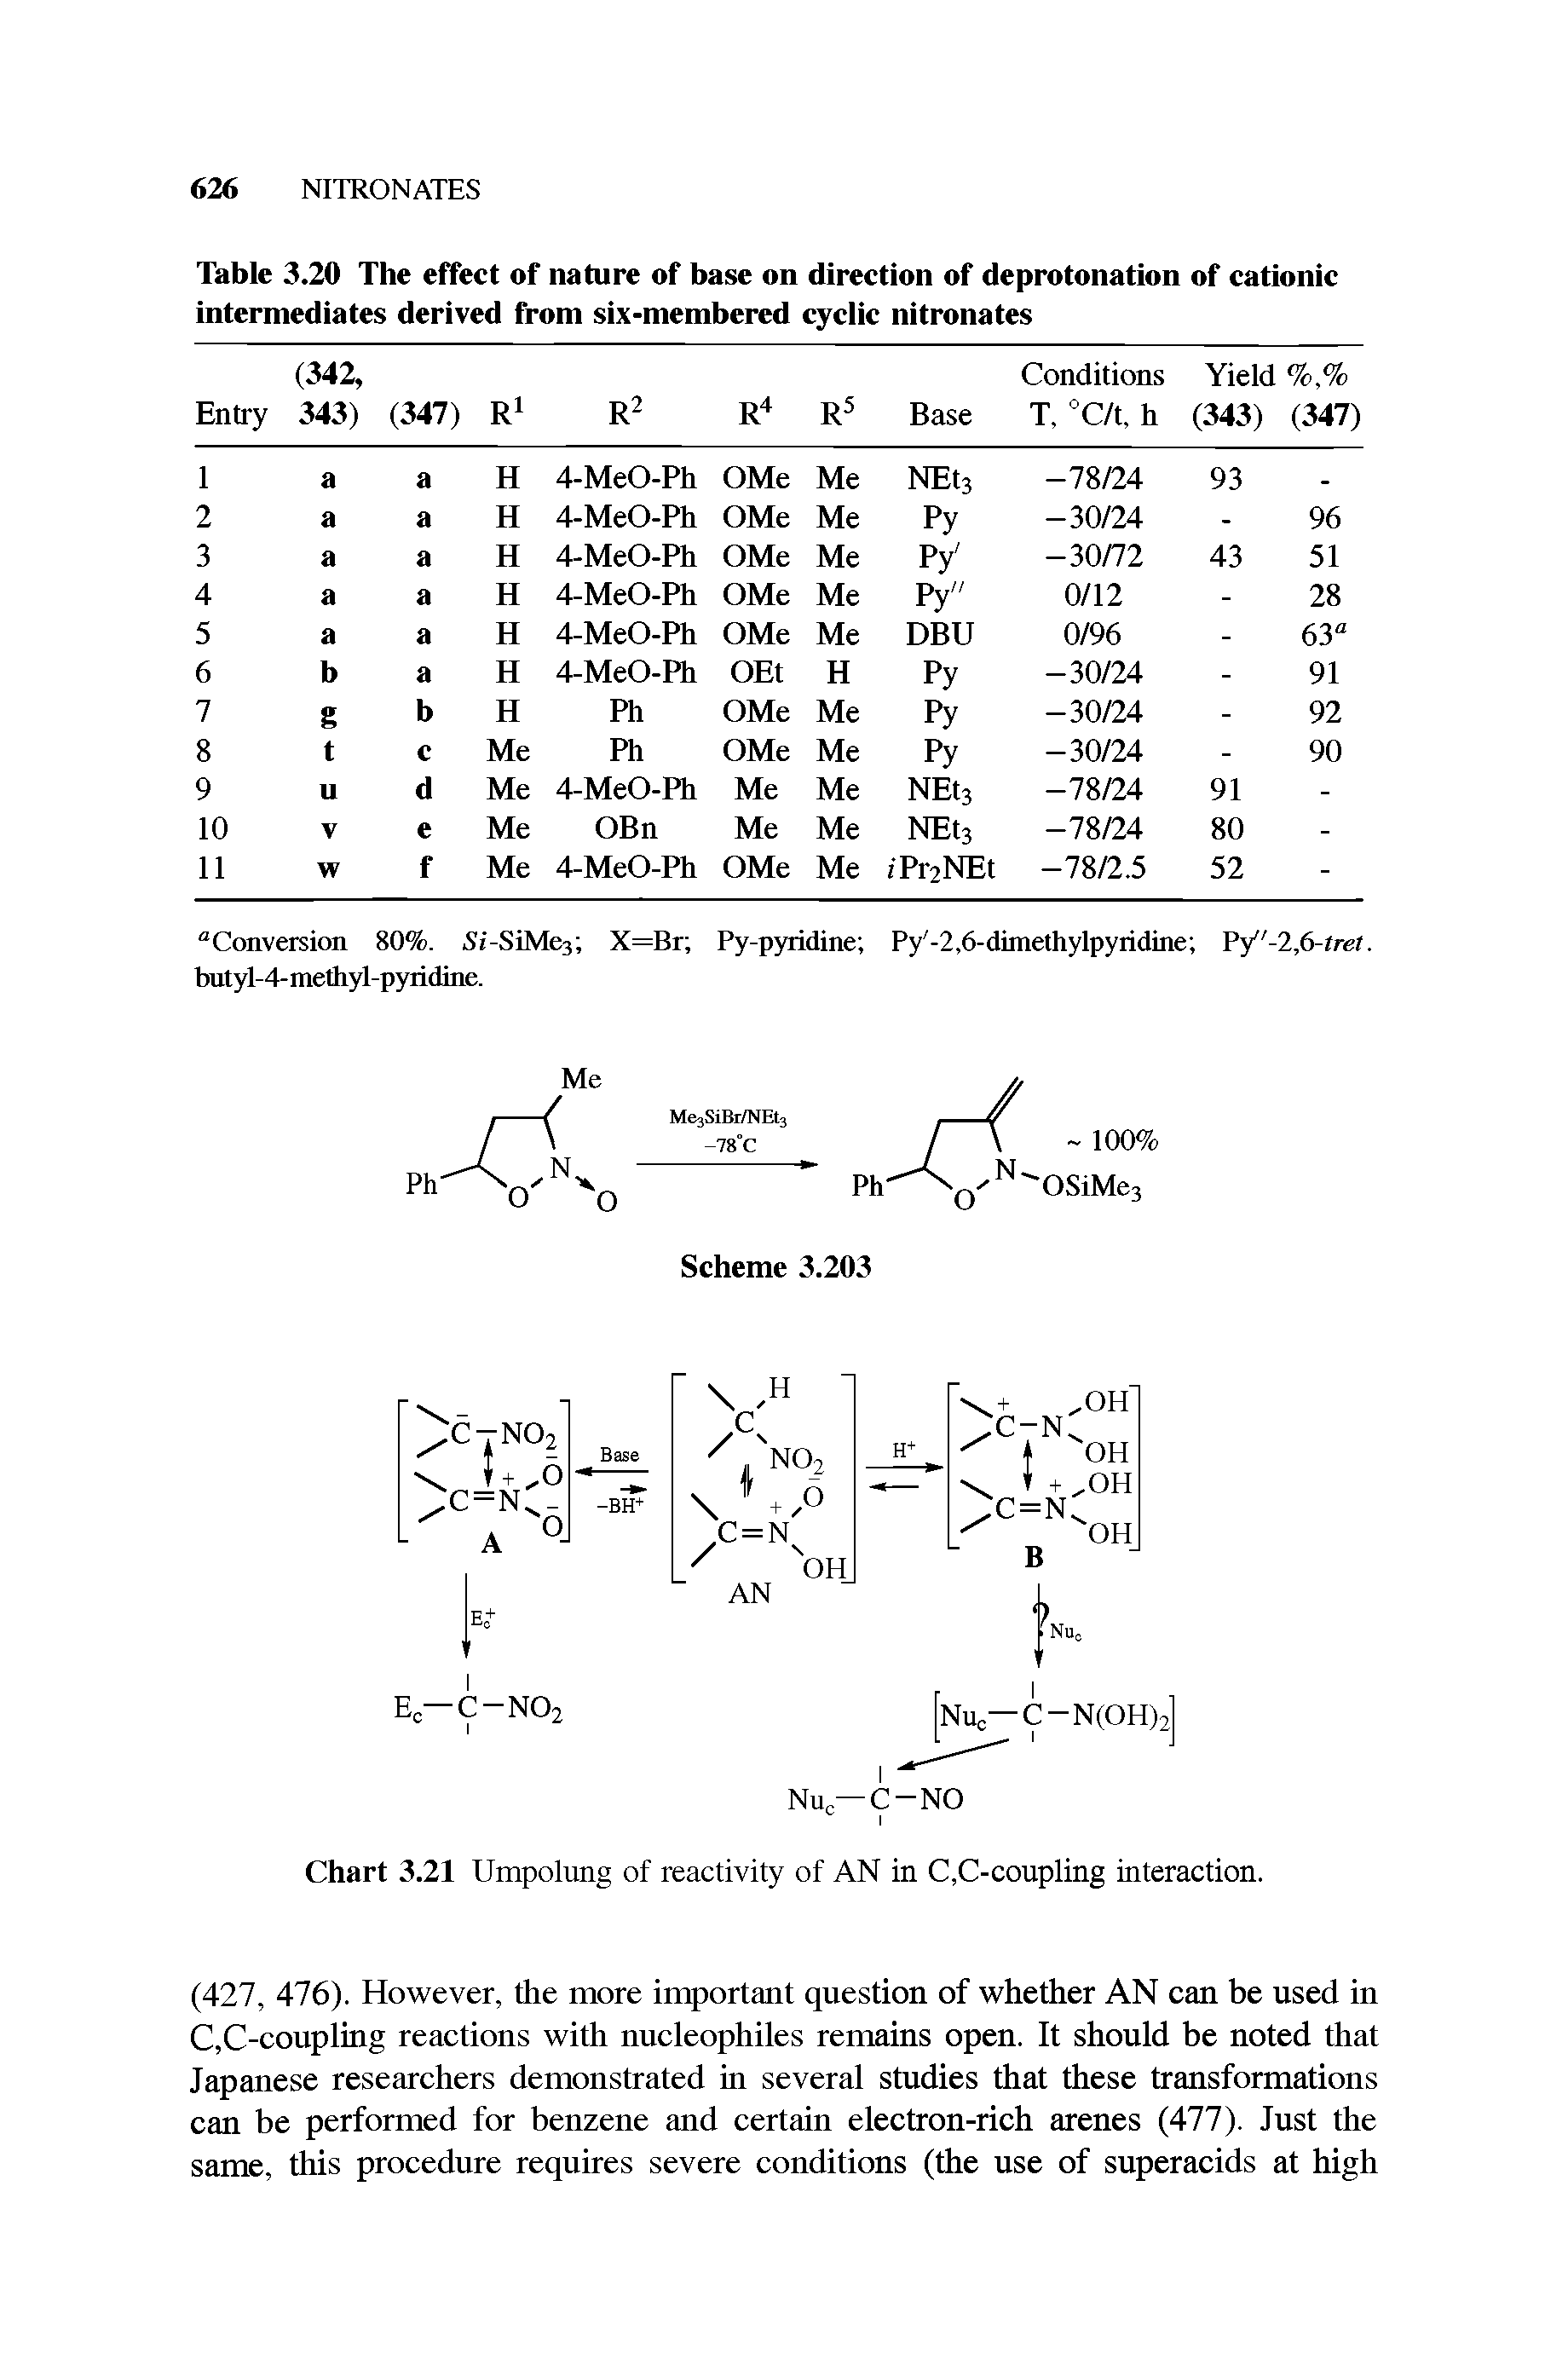 Table 3.20 The effect of nature of base on direction of deprotonation of cationic intermediates derived from six-membered cyclic nitronates...